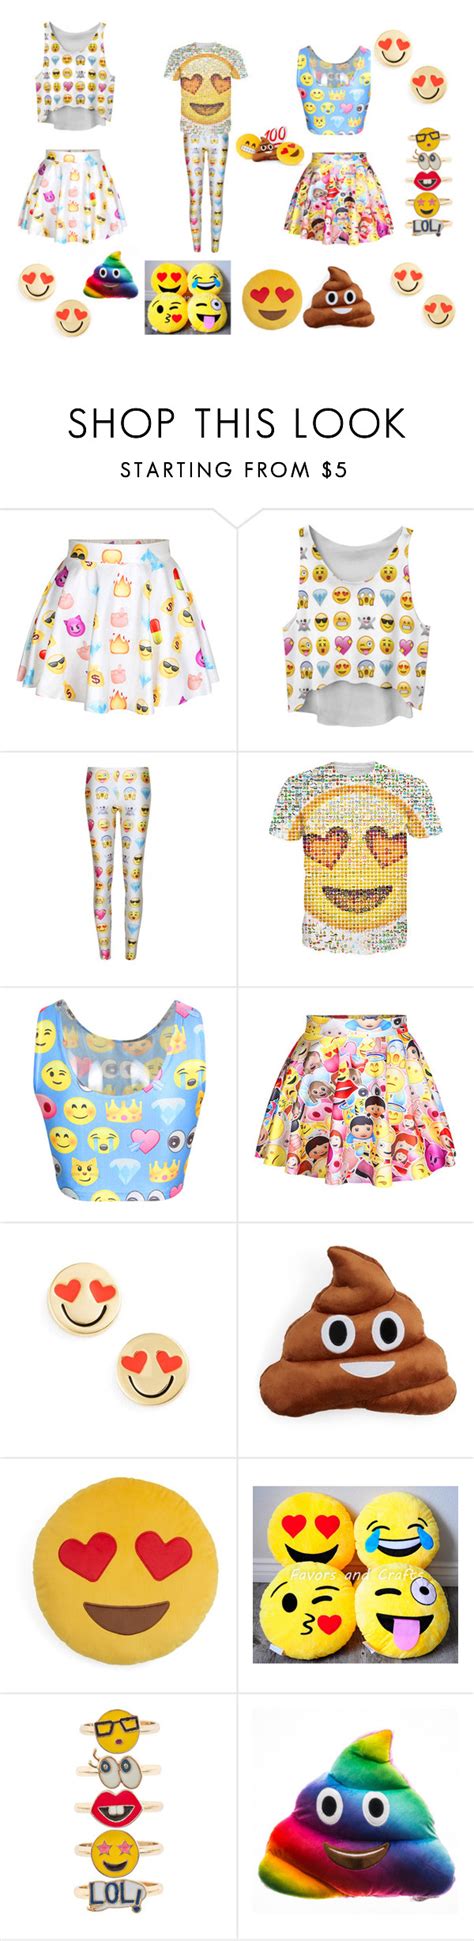 Dress Up As Your Favorite Emoji By Friendlyy Liked On Polyvore